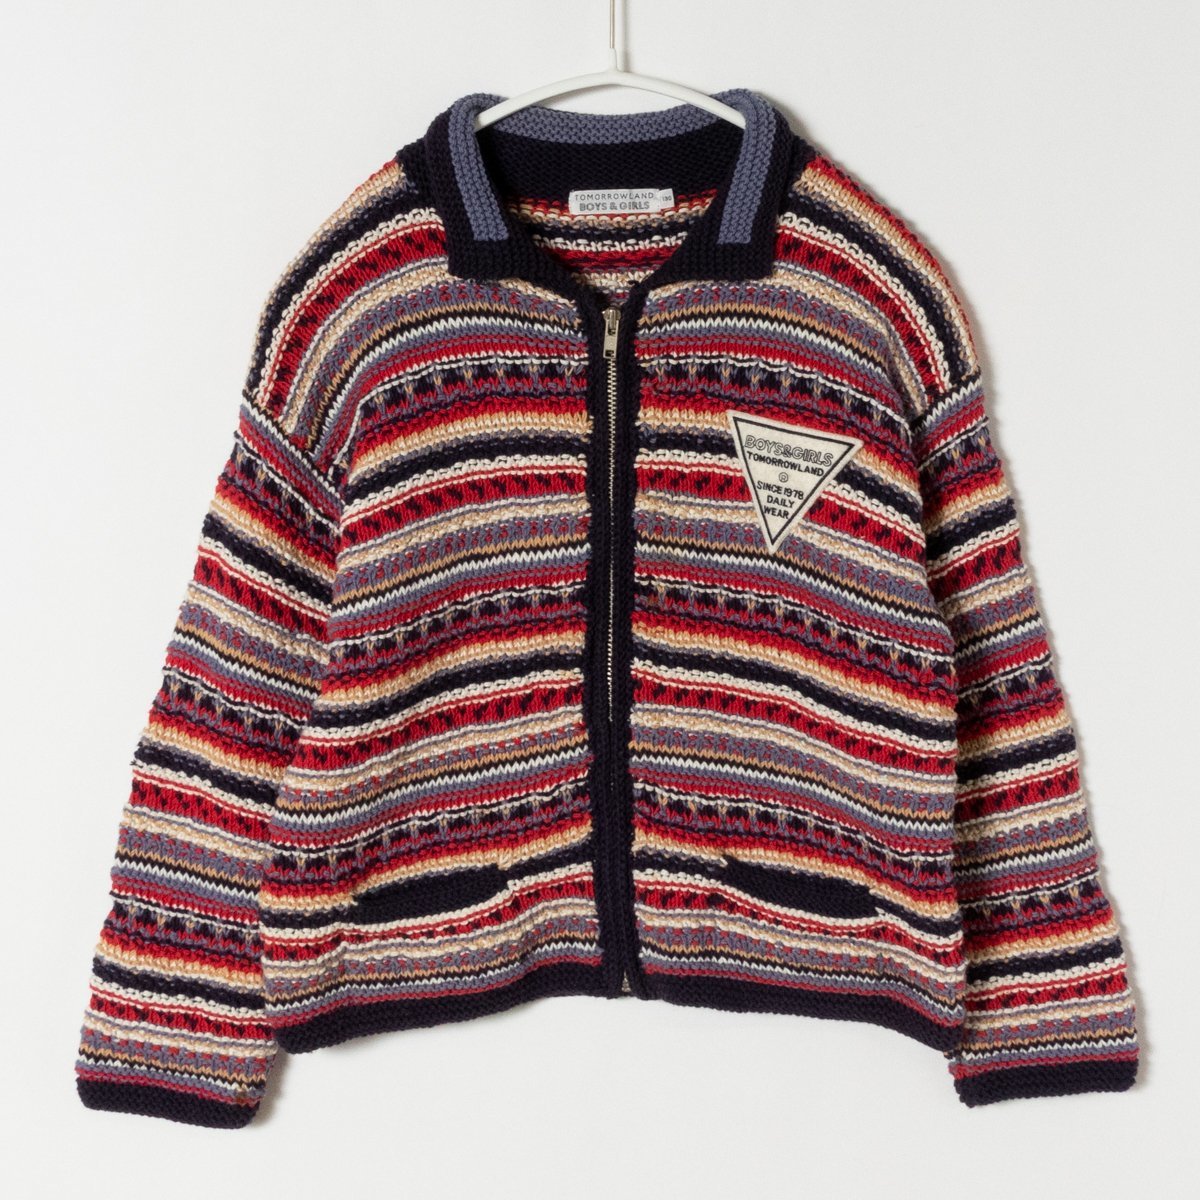 TOMORROWLAND BOYS & GIRLS Tomorrowland Kids child clothes collar attaching knitted cardigan 130 multicolor cotton cotton navy red 